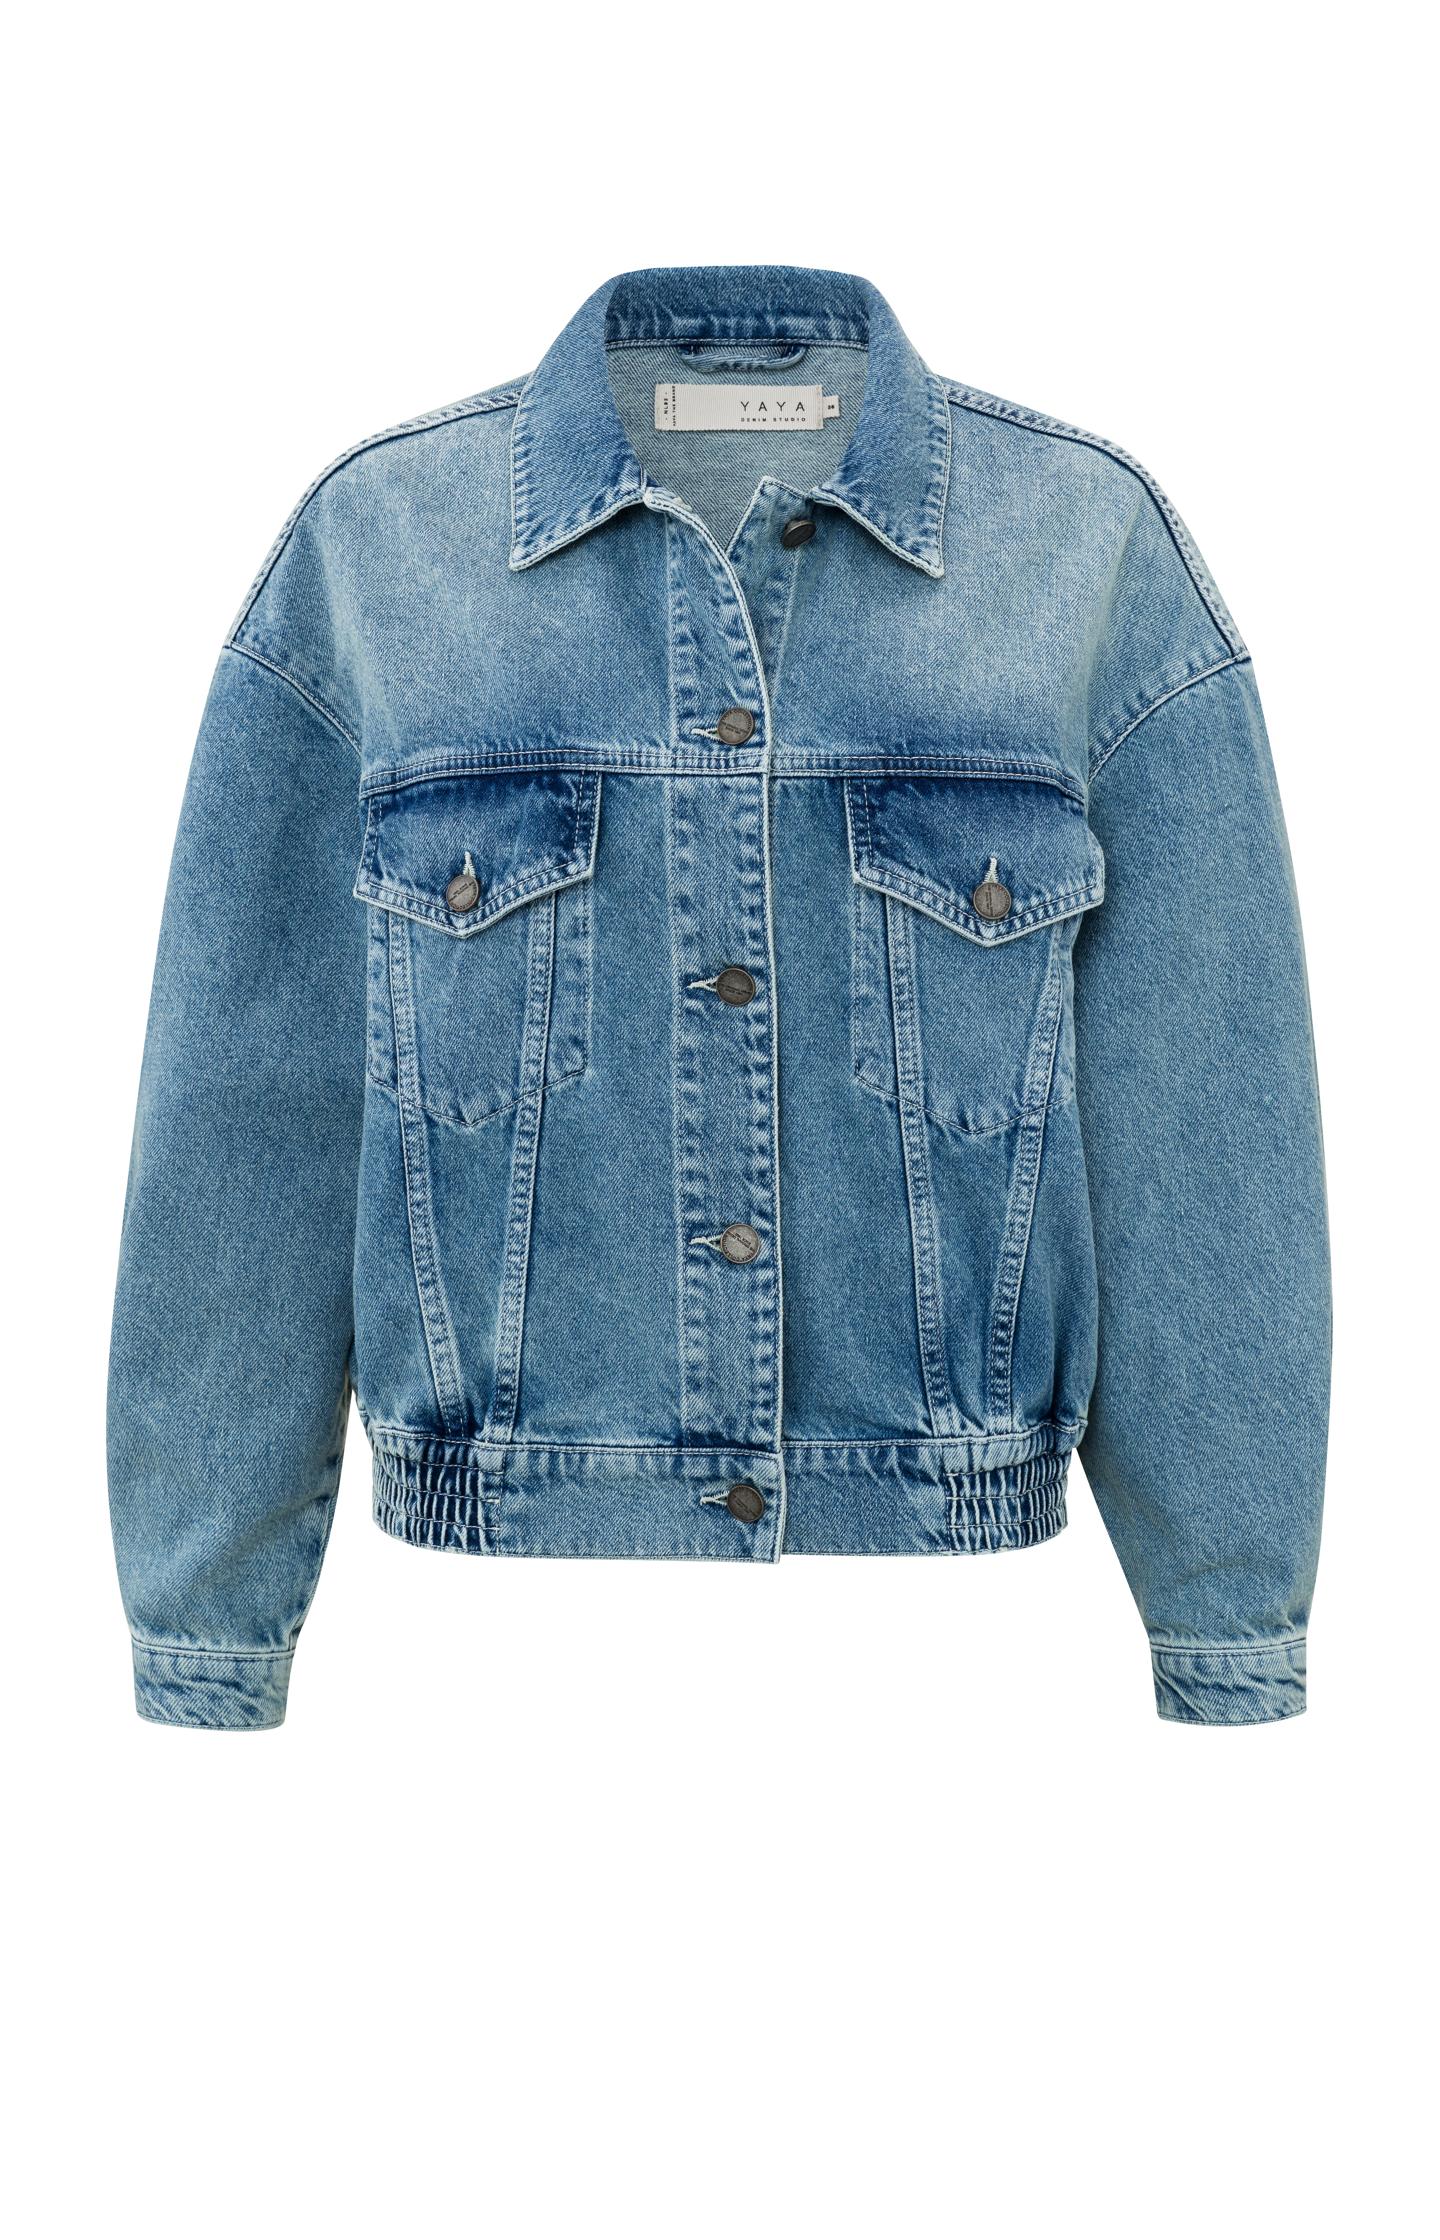 Bomber denim jacket with long sleeves, buttons and pockets - Type: product